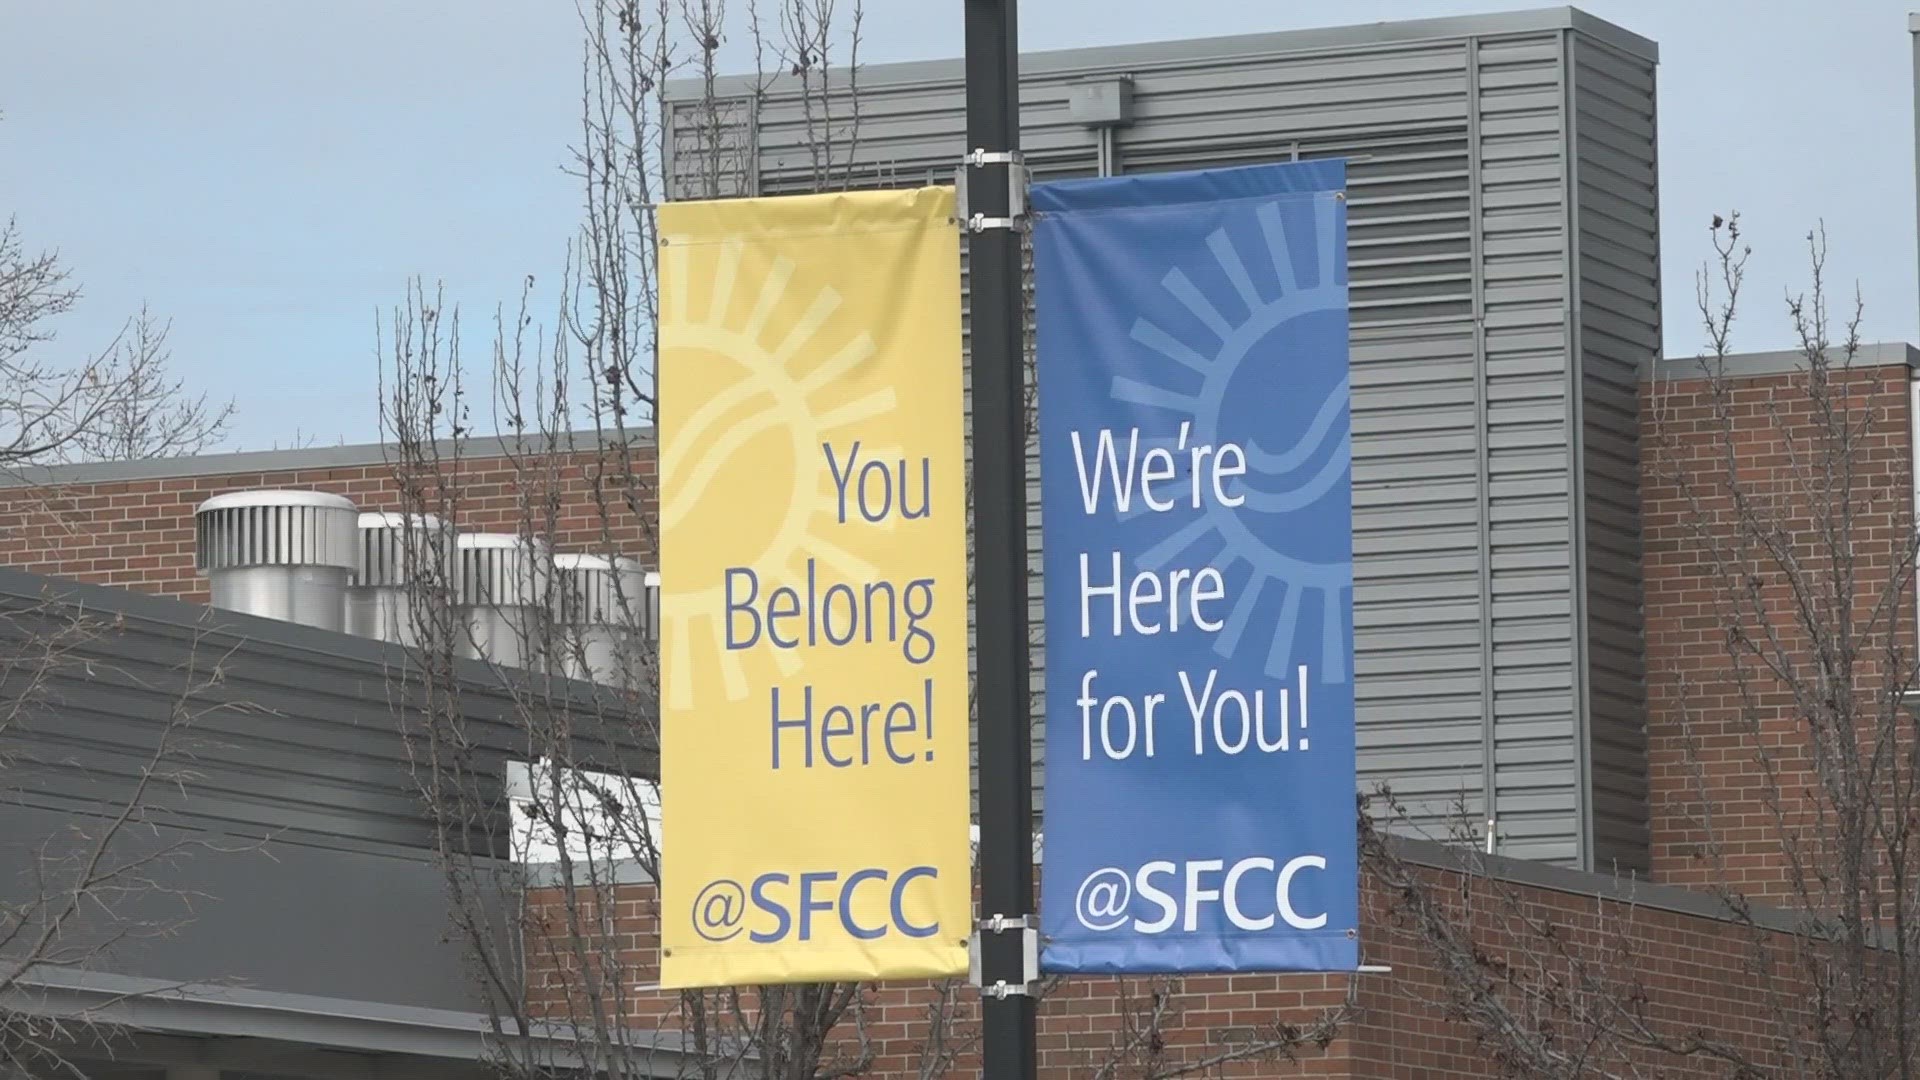 Spokane Community College president says both community colleges saw an increase in enrollment every year and expect admit more students this year.